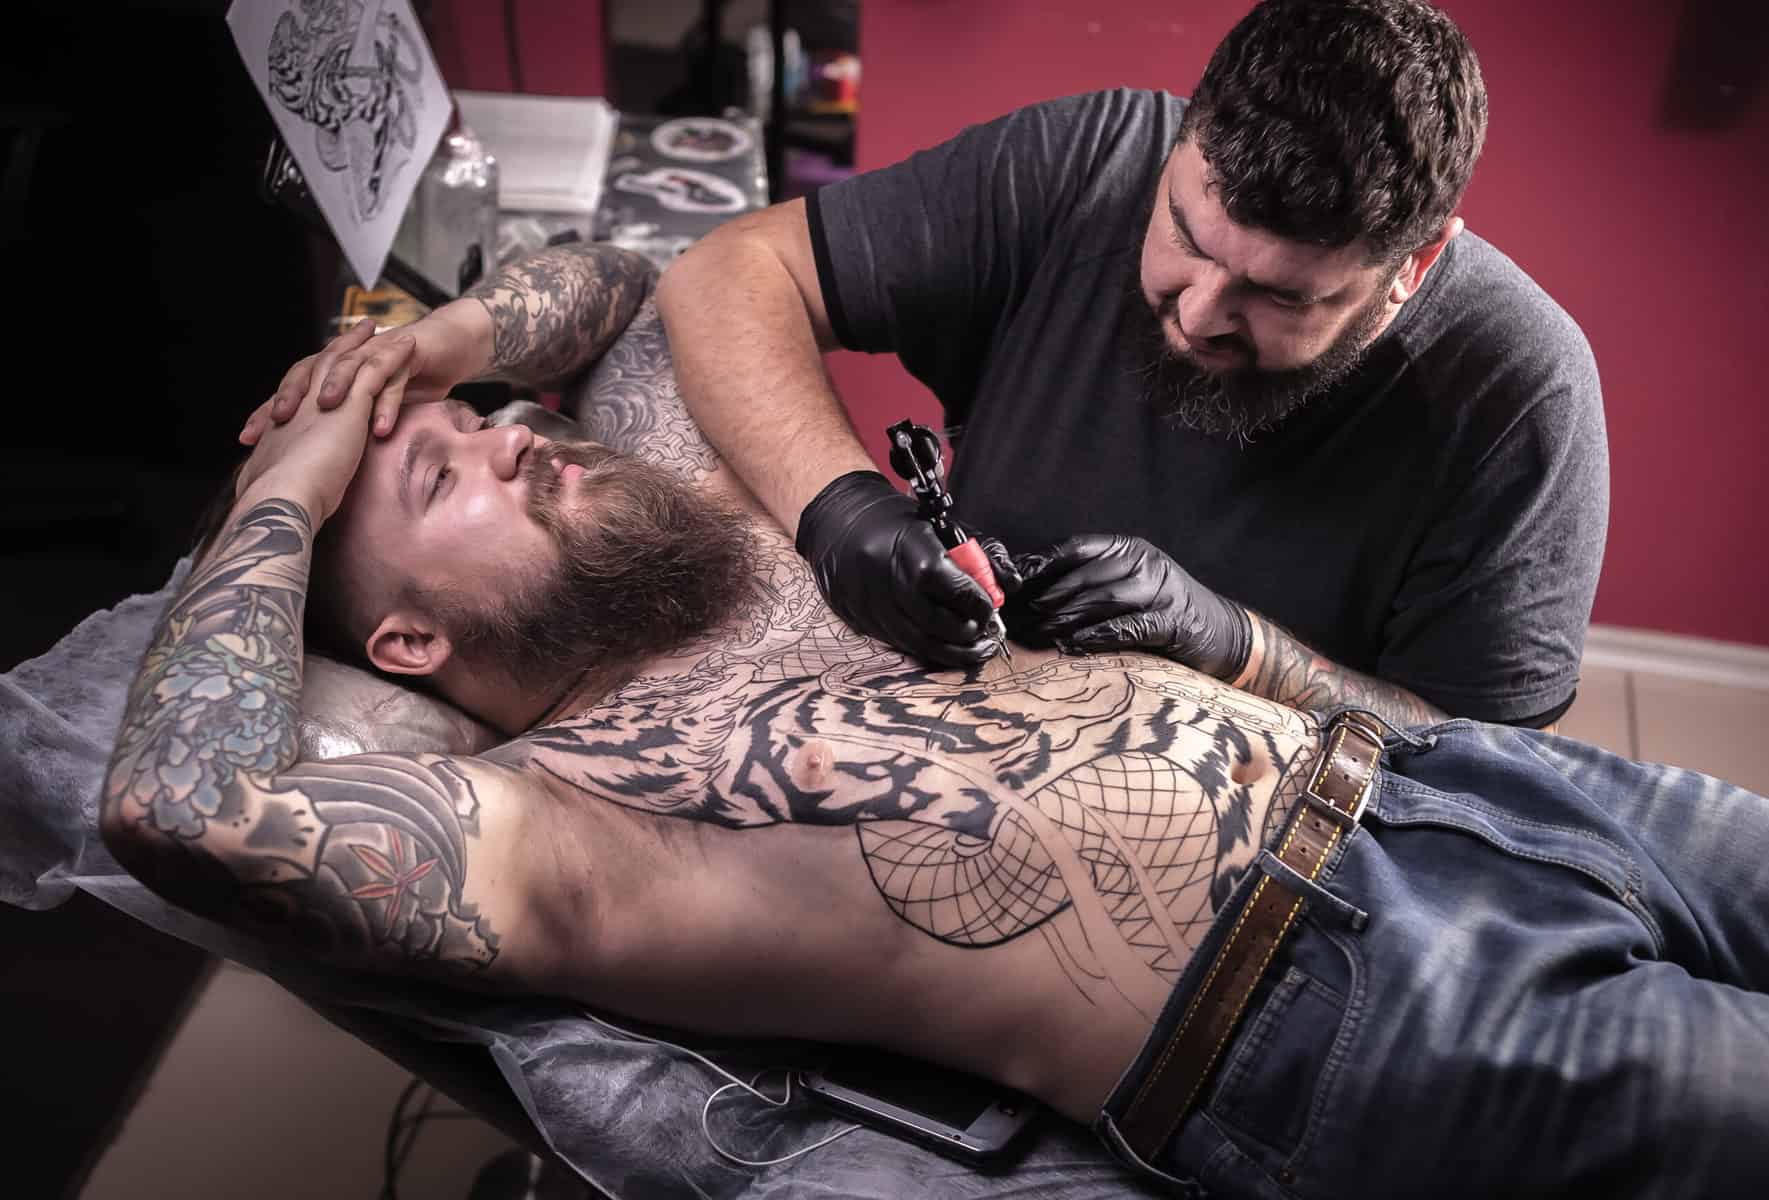 Get paid to draw tattoos with a Professional tattooist posing in studio.